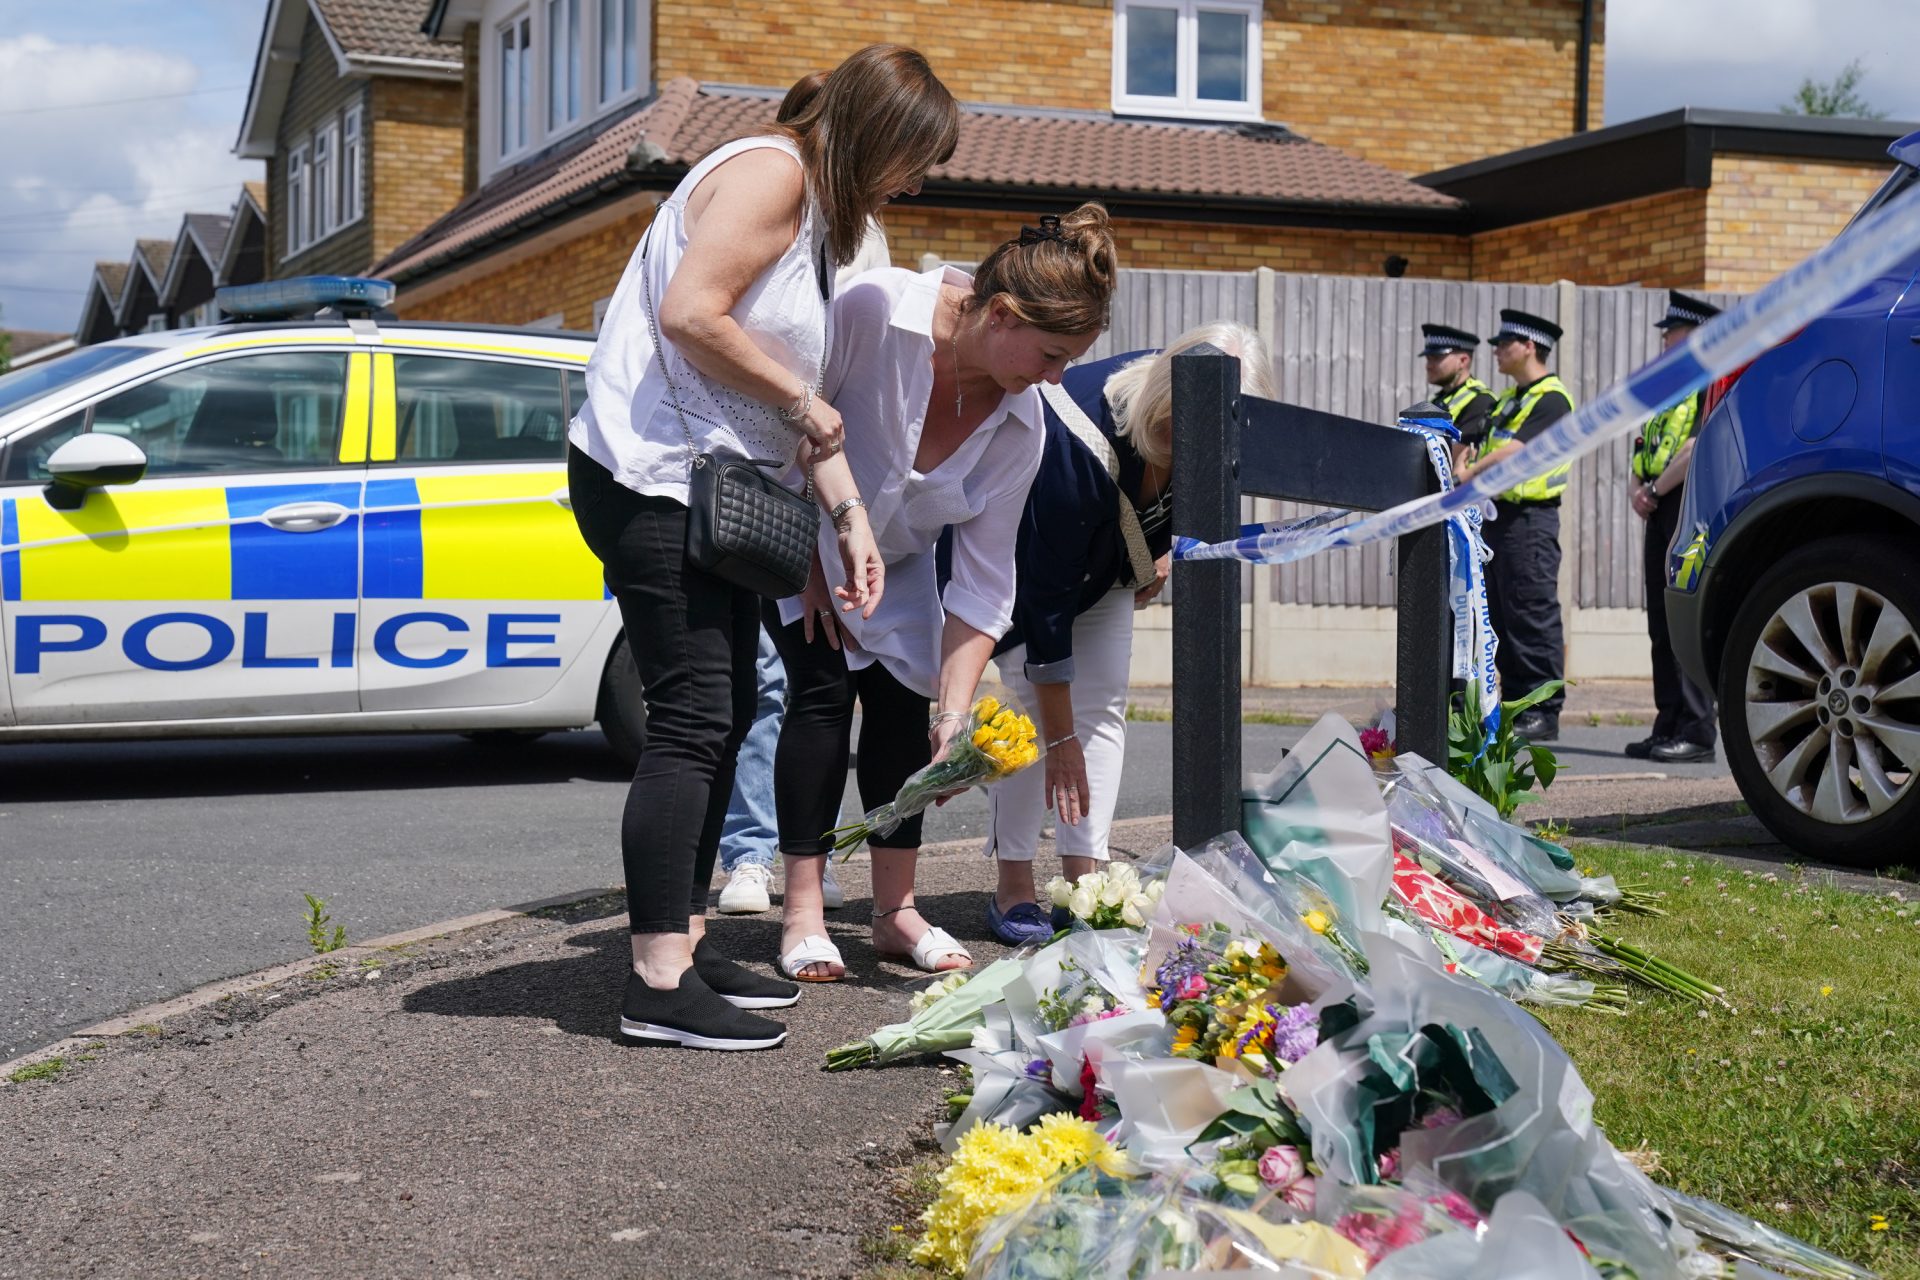 Flowers for the victims